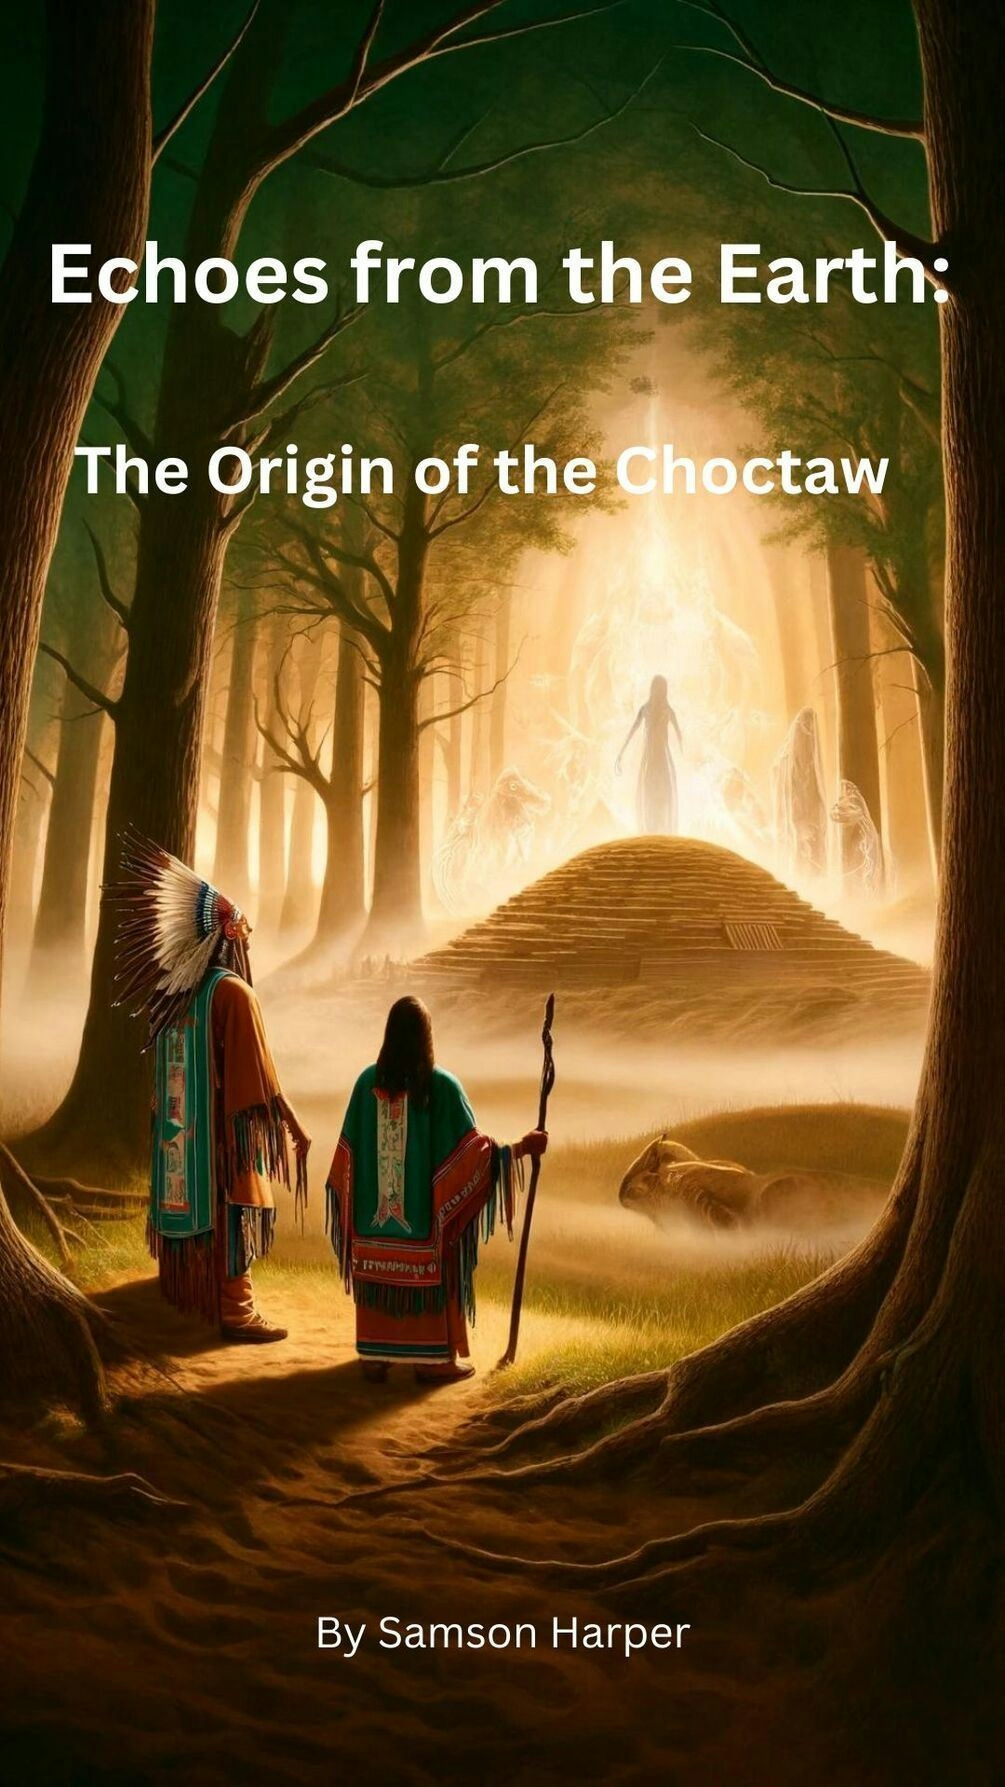 Echoes from the Earth: The Origin of the Choctaw